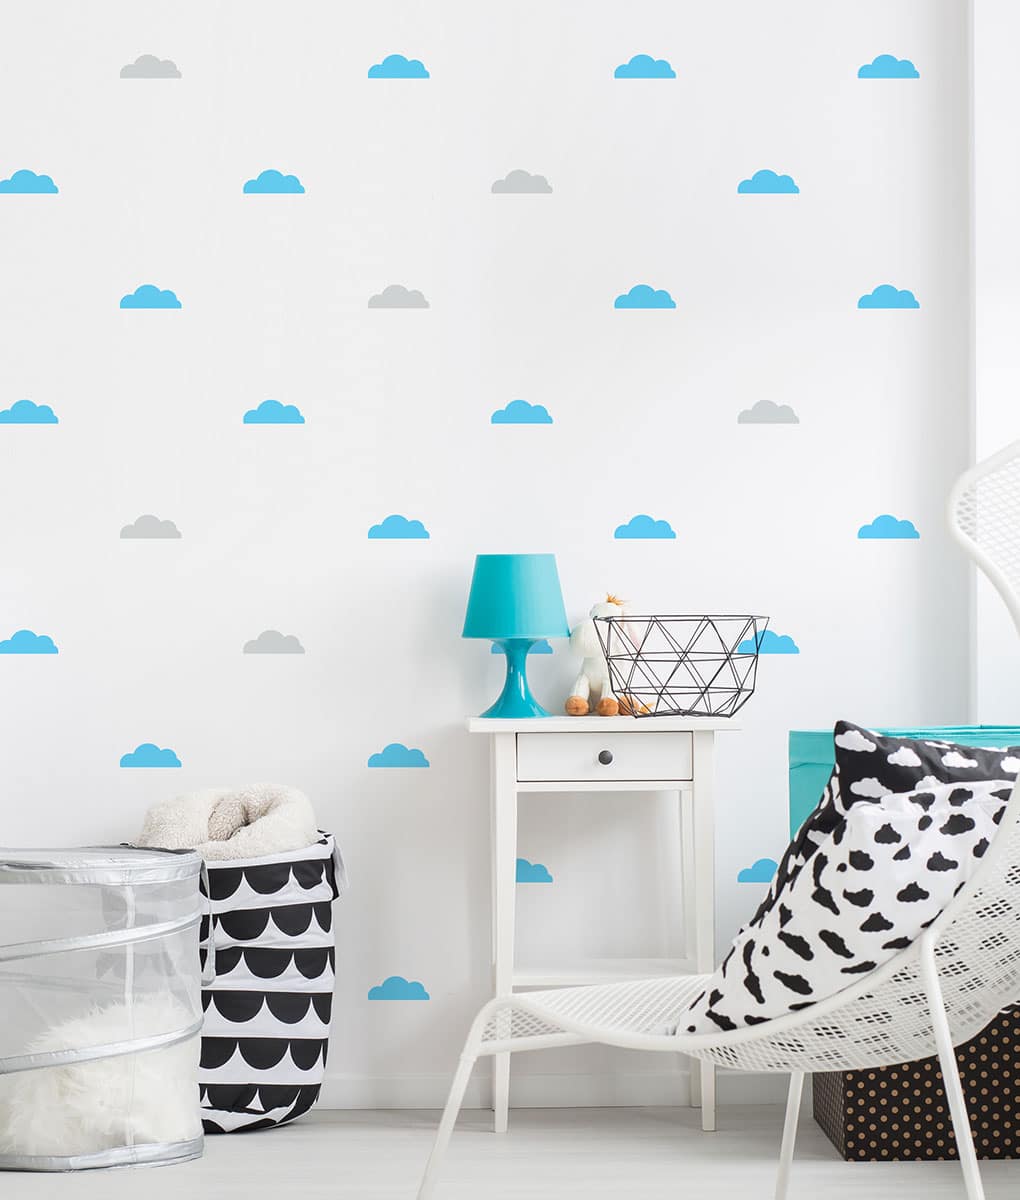 Mini Cloud Decals Cloud Stickers 41 Orchard